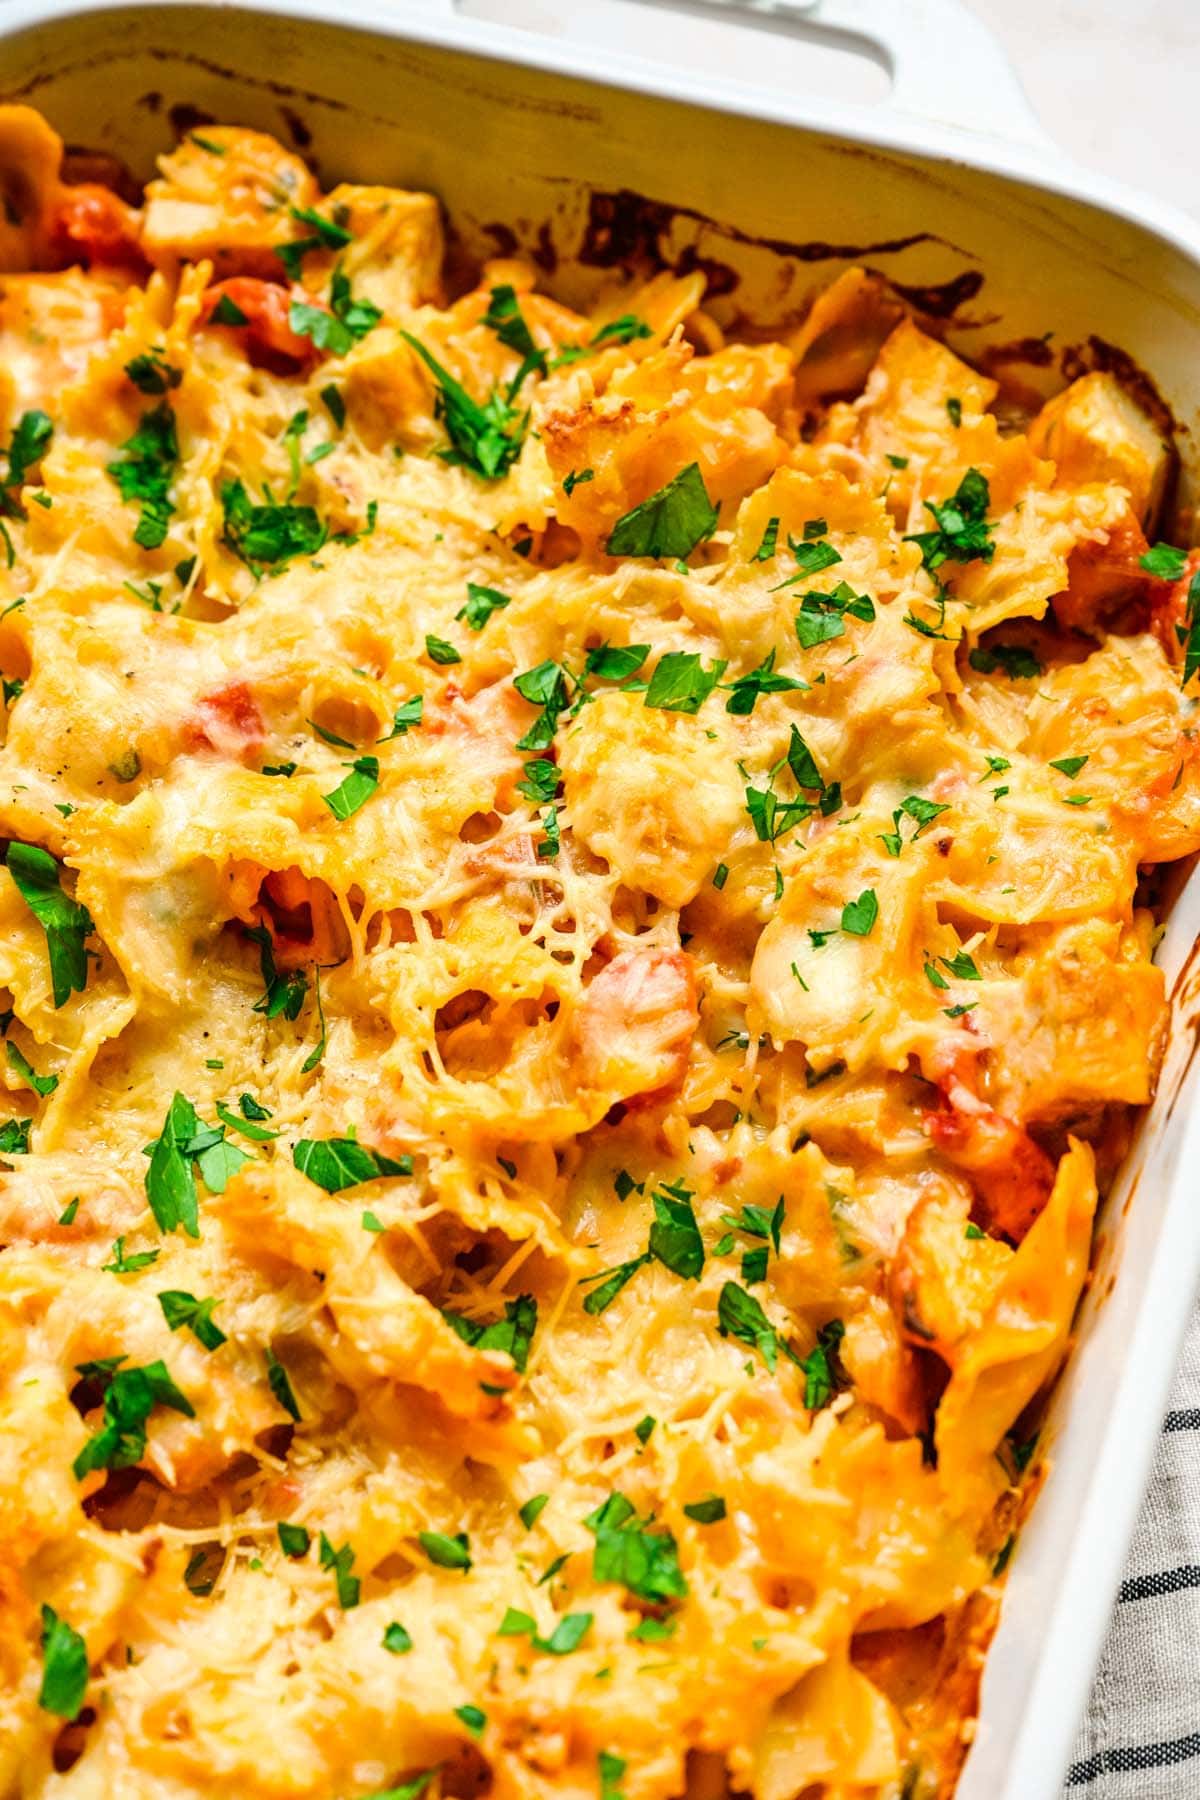 A close up photo of a chicken pasta bake in a white rectangular casserole dish, highlighting the melted cheese topping and garnished with parsley.